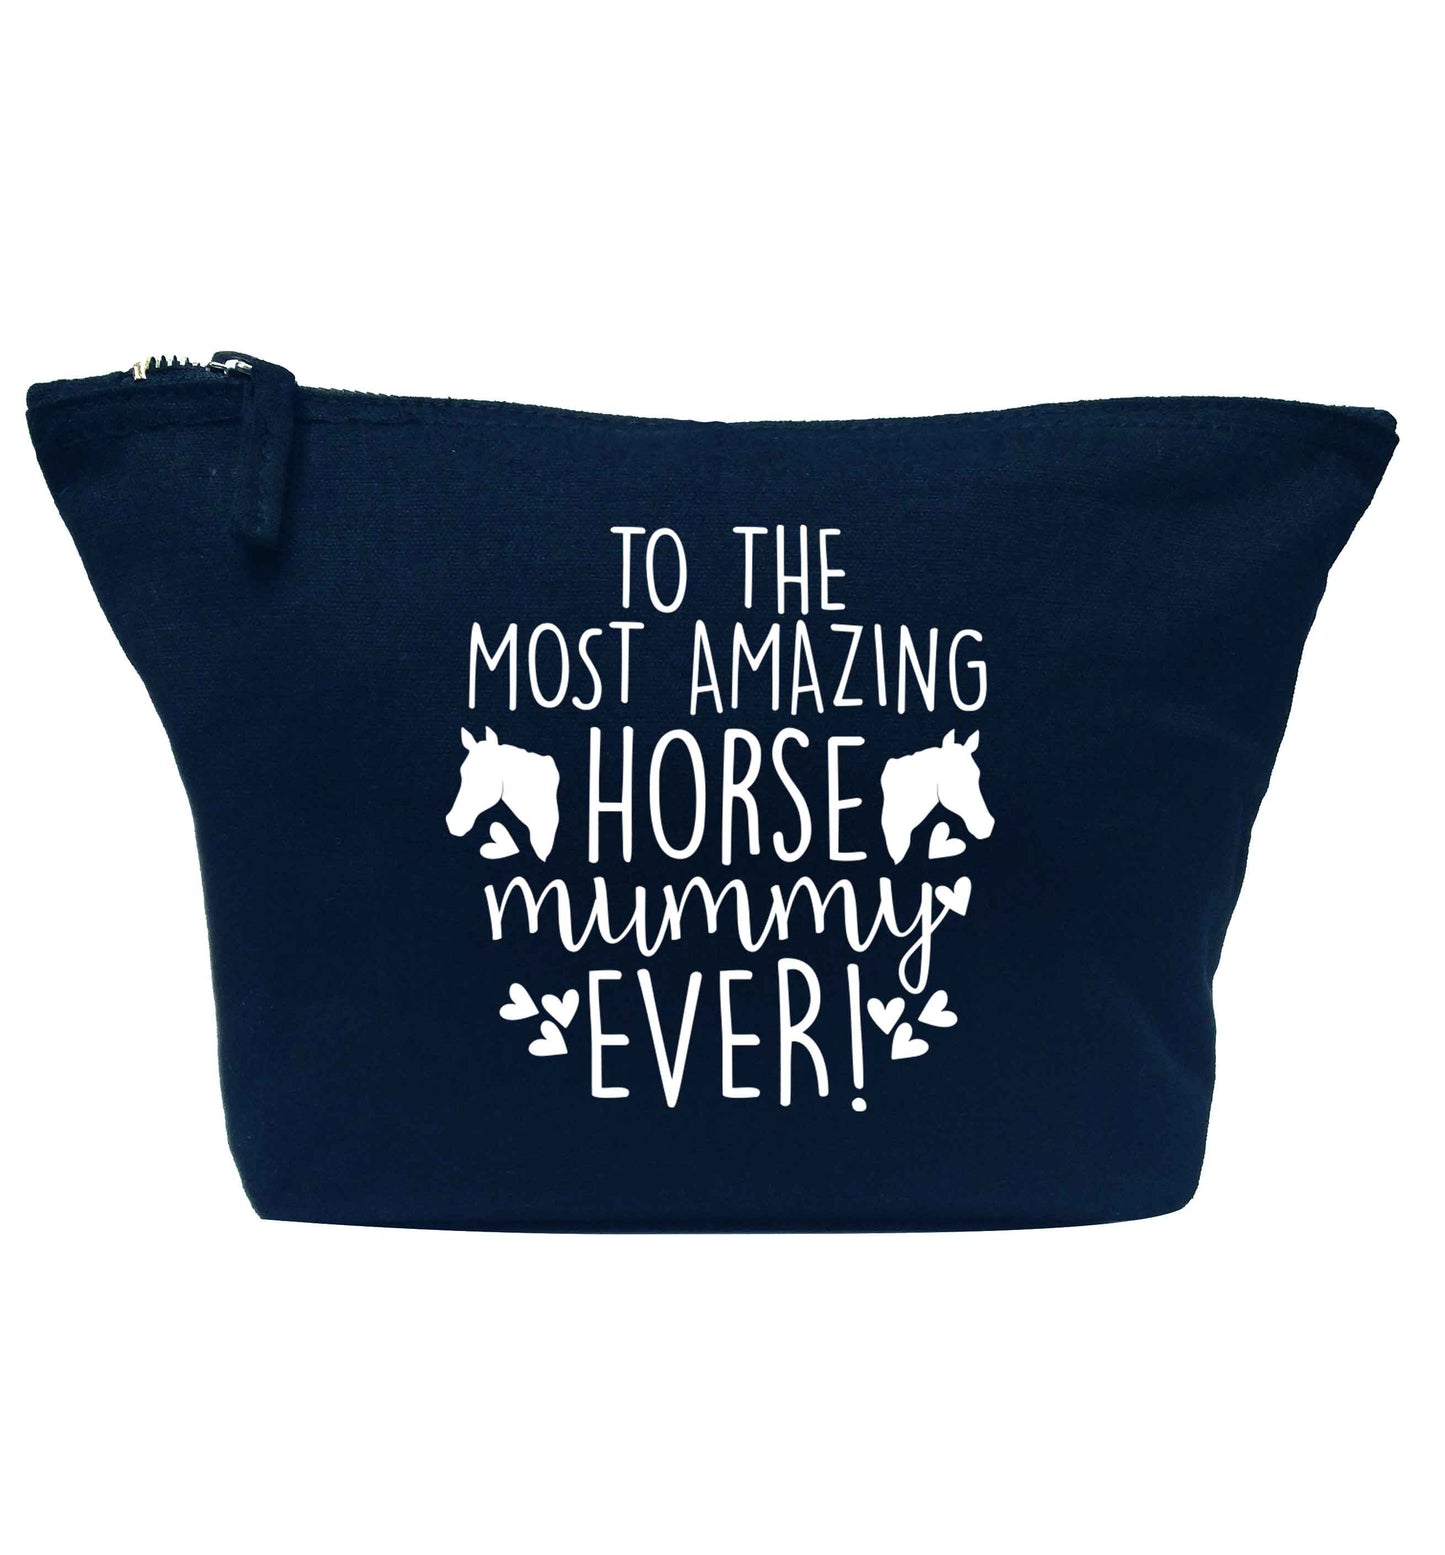 To the most amazing horse mummy ever! navy makeup bag